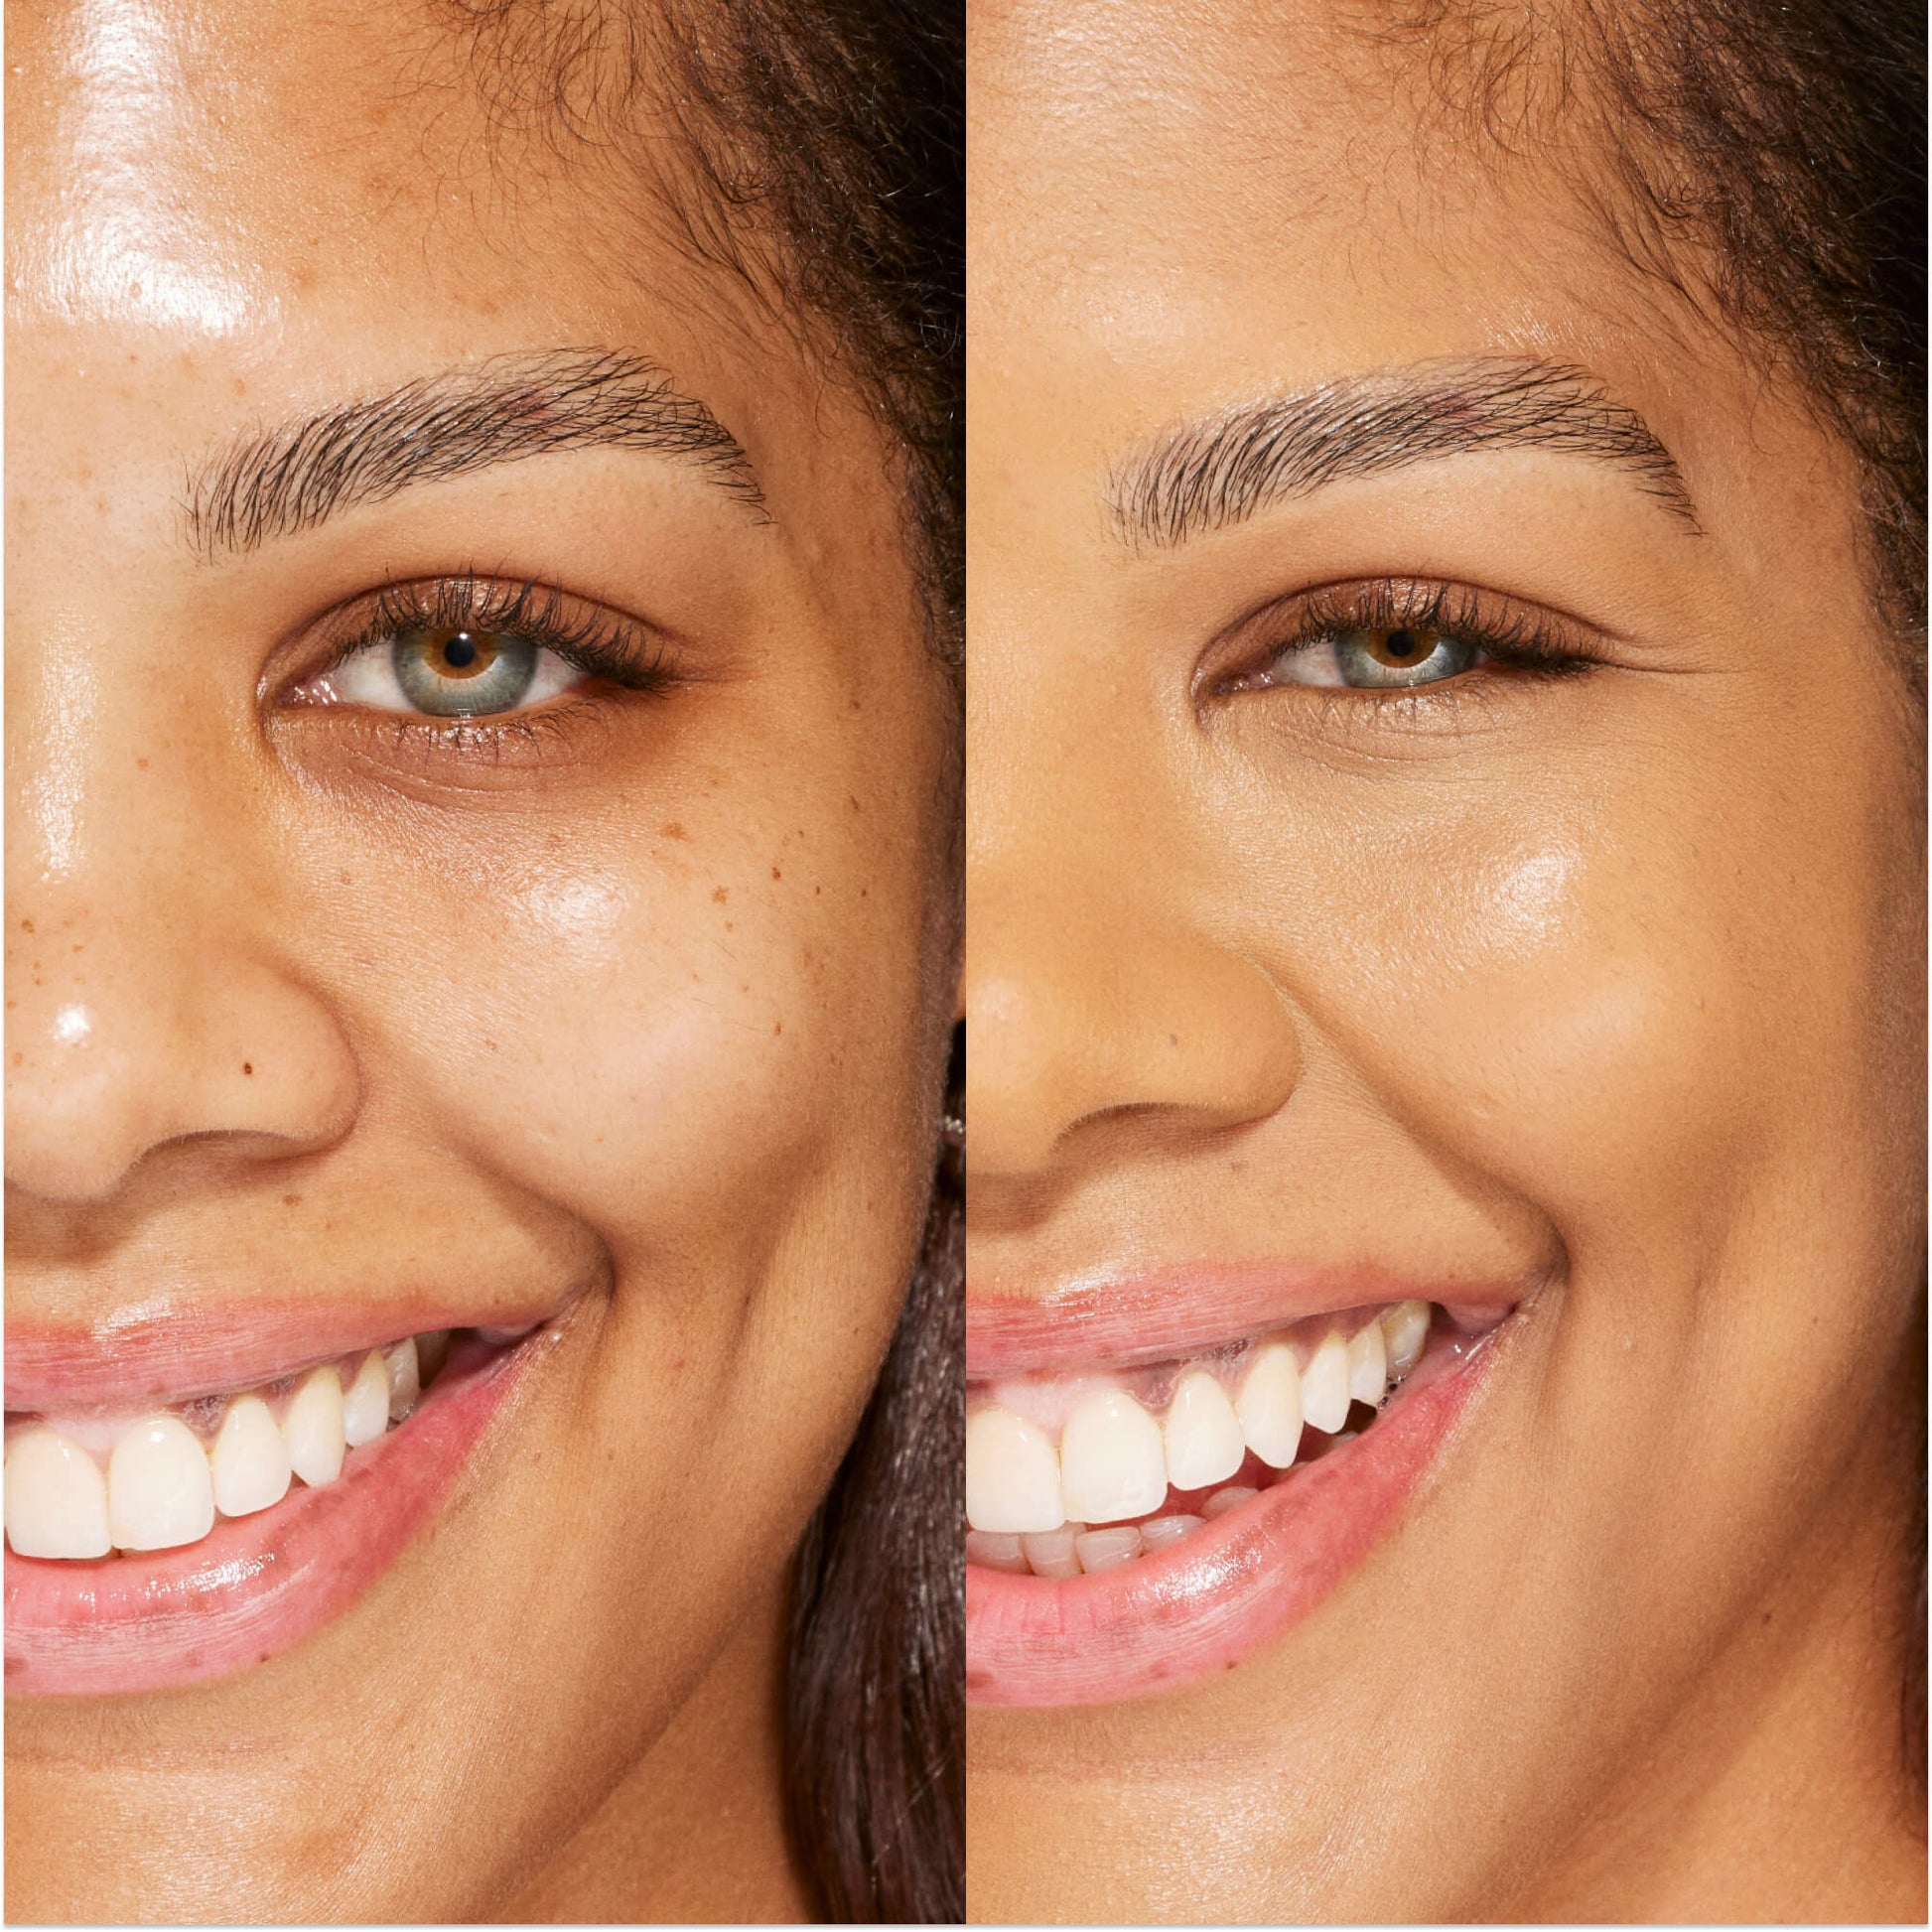 A person's face before and after using Tower 28 Beauty's Swipe Serum Concealer in shade 12.0 PALI to cover up dark circles, blemishes, and discoloration